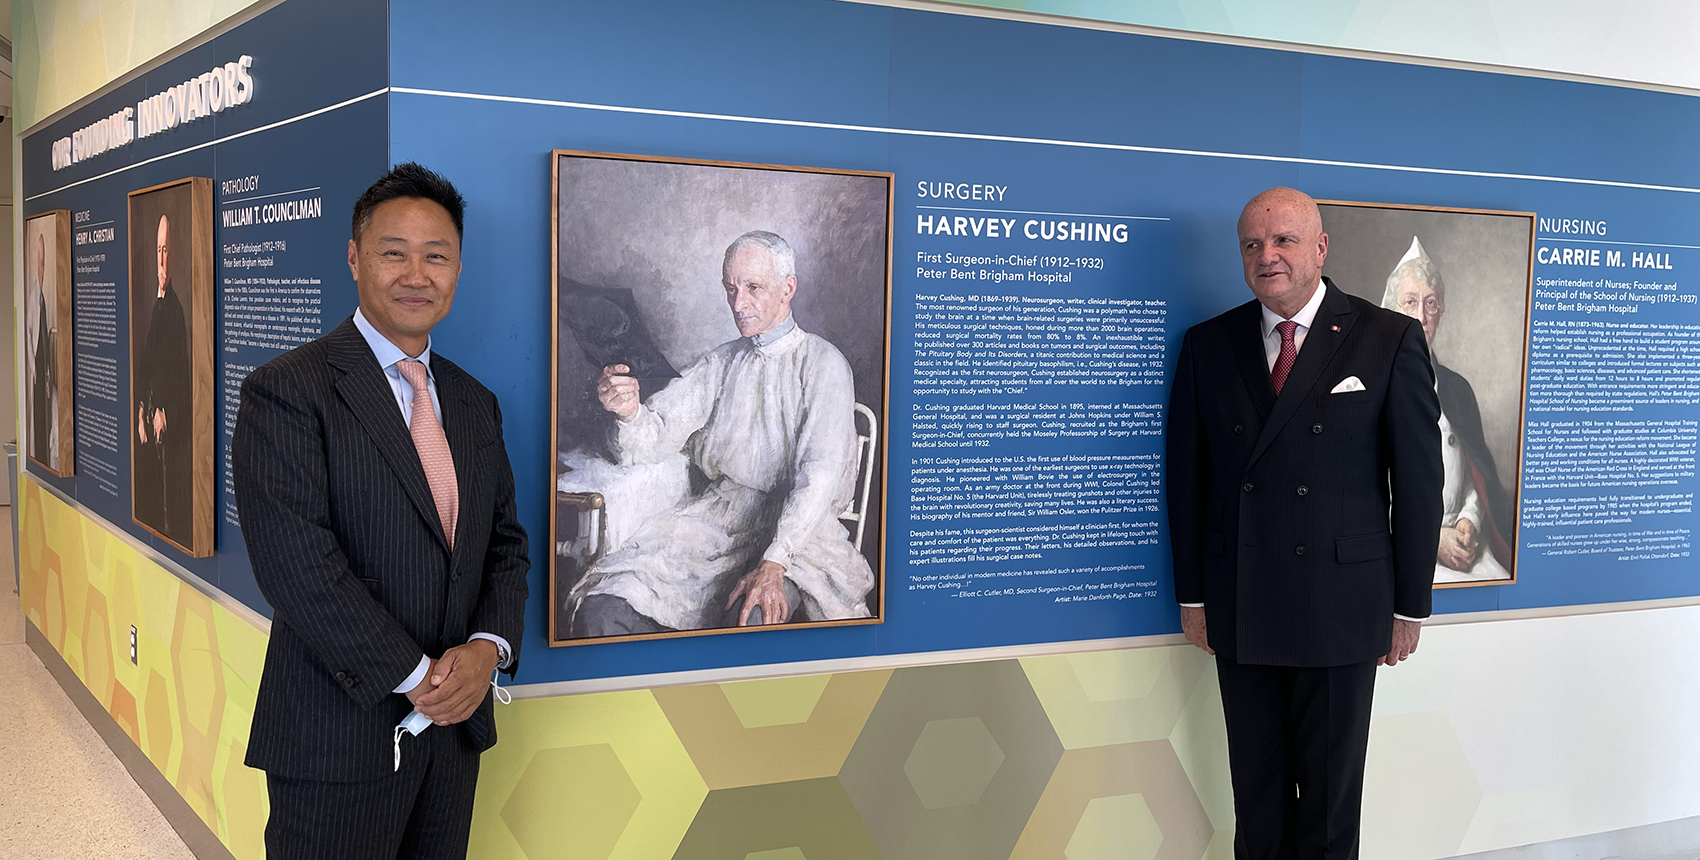 In a hallway painted with colorful geometric patterns, two men in suits stand on either side of a portrait of a man in surgical gowns reviewing an X-ray of a patient’s skull. The portrait is labeled “Harvey Cushing.”